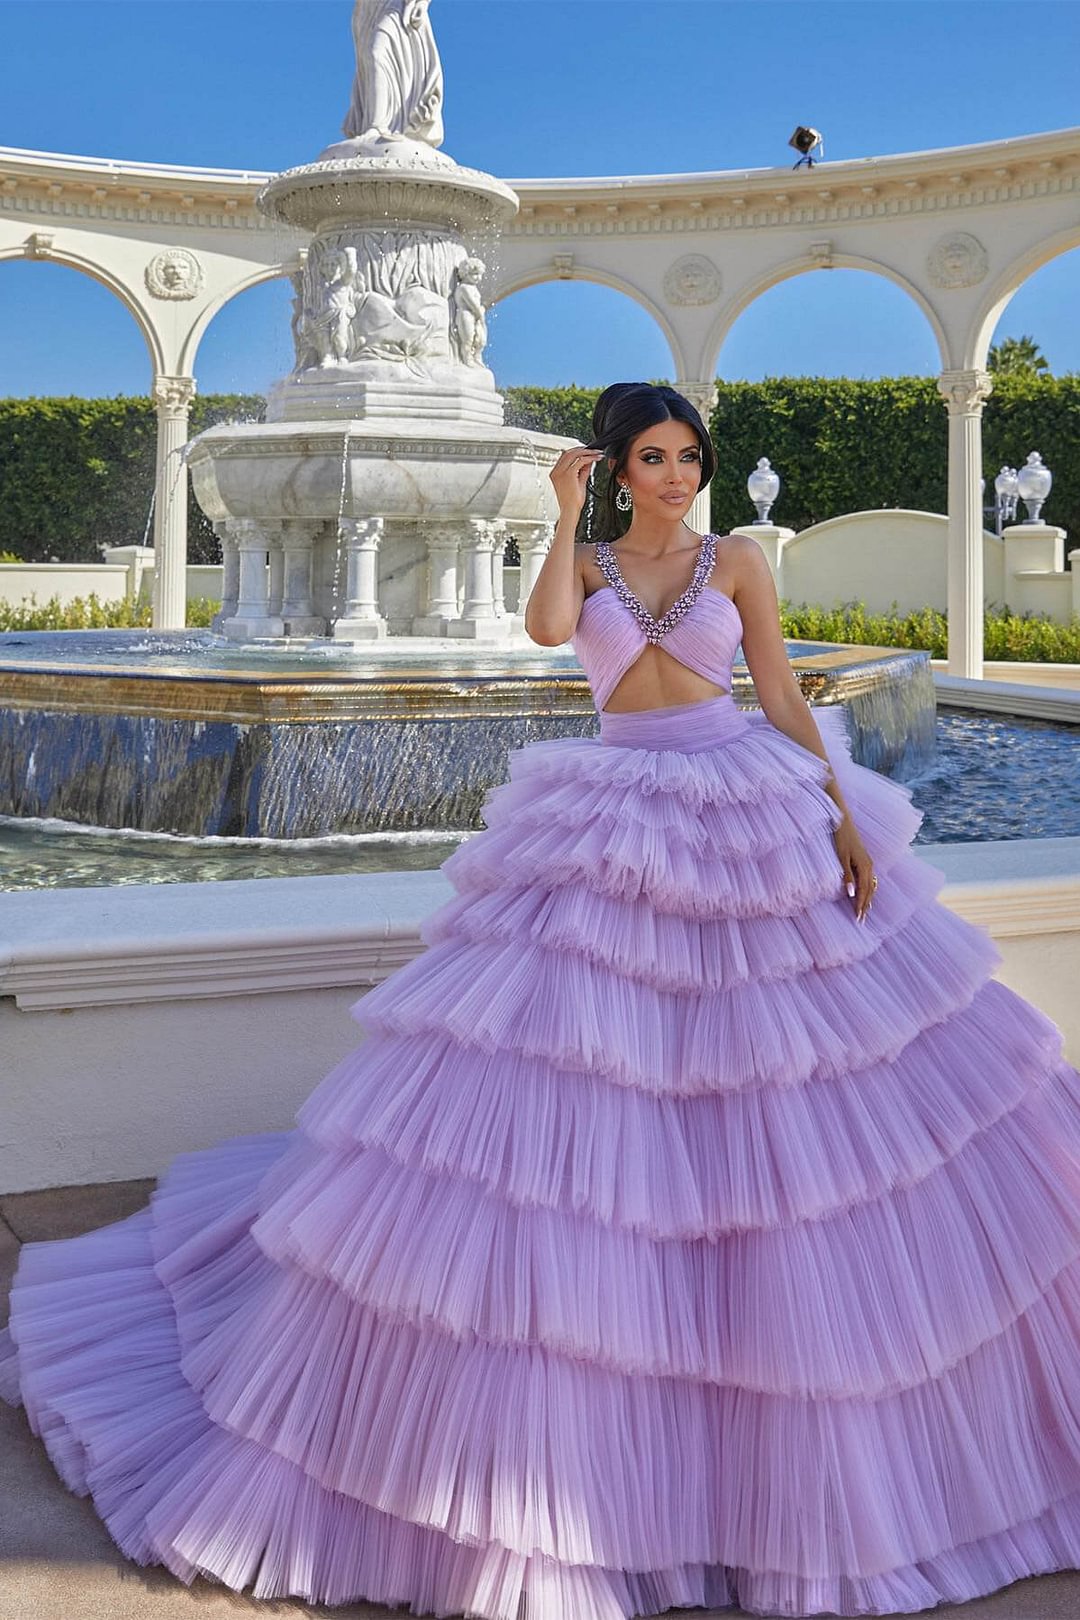 Luluslly Lilac Tulle Layered Evening Dress Ball Gown Sleeveless With Crystal